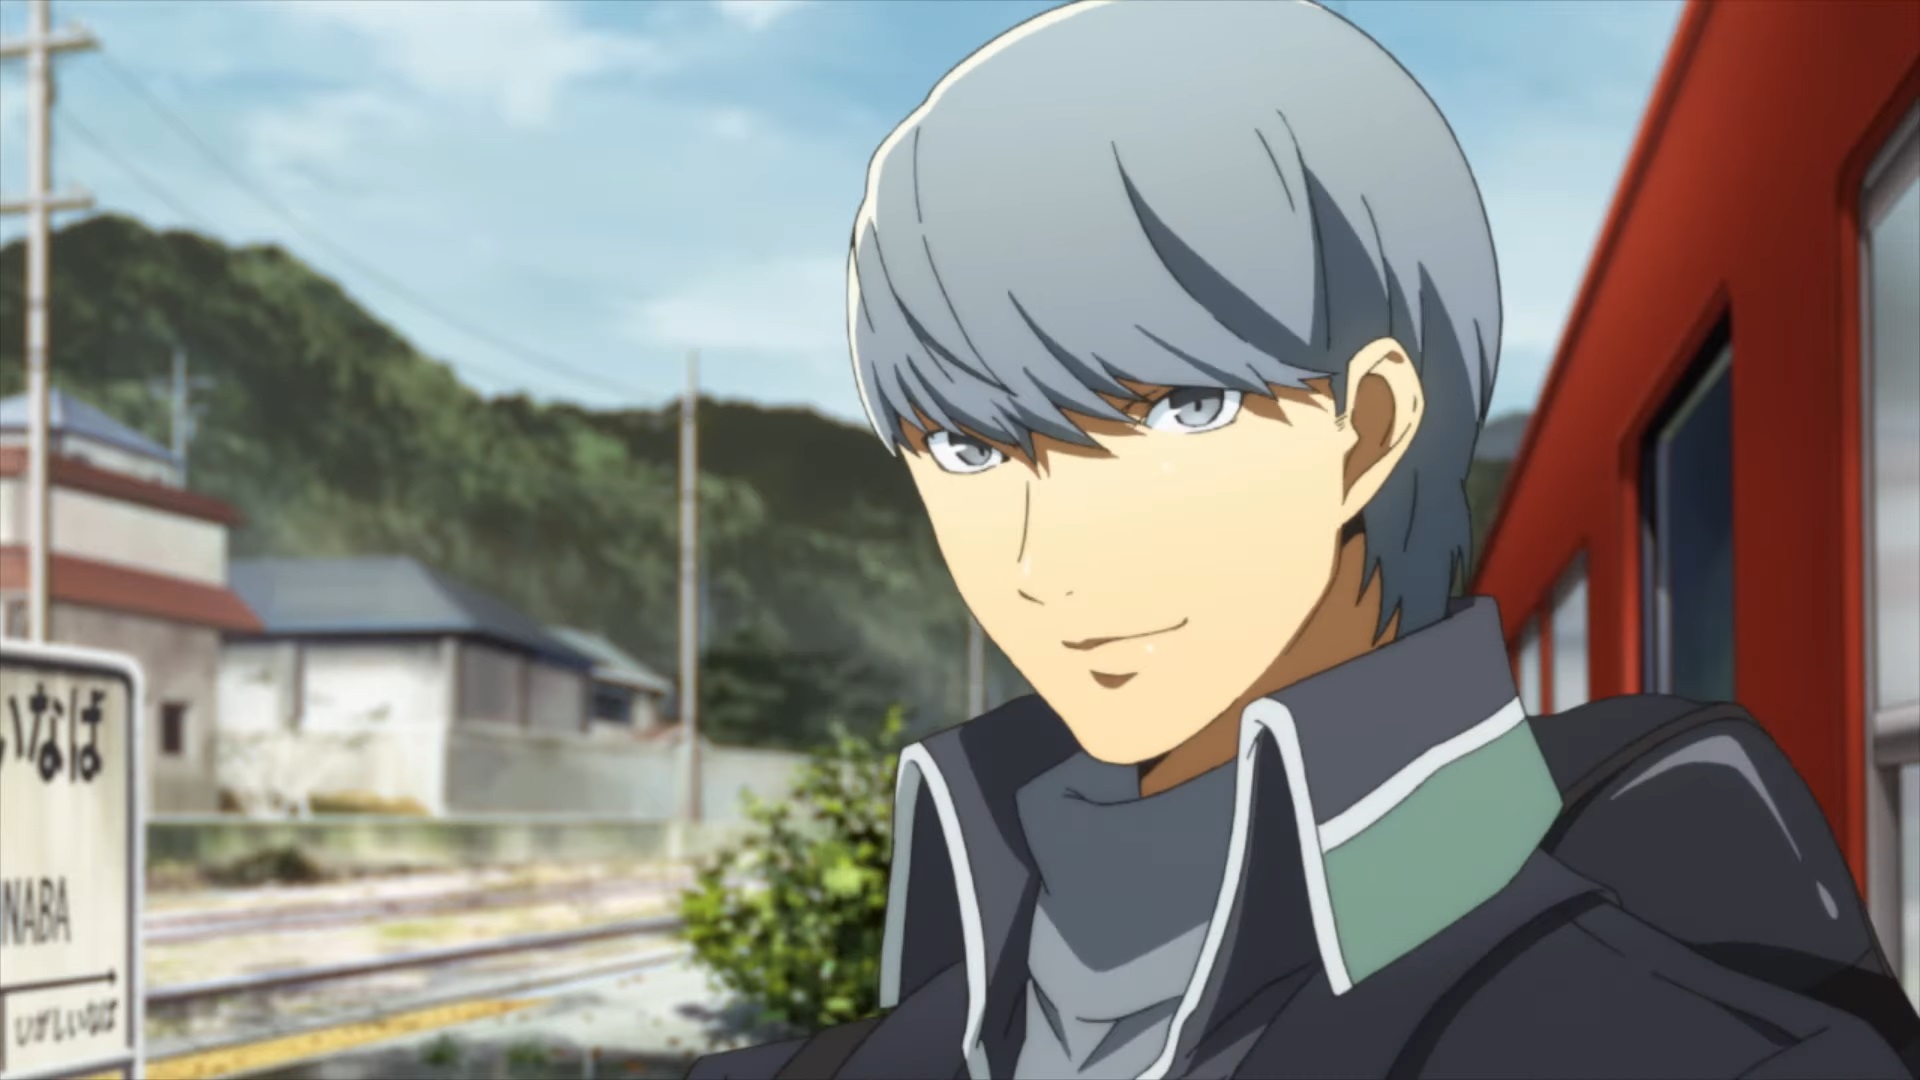 Persona 4 Golden Anime Adaptation Is Now Available Through Funimation